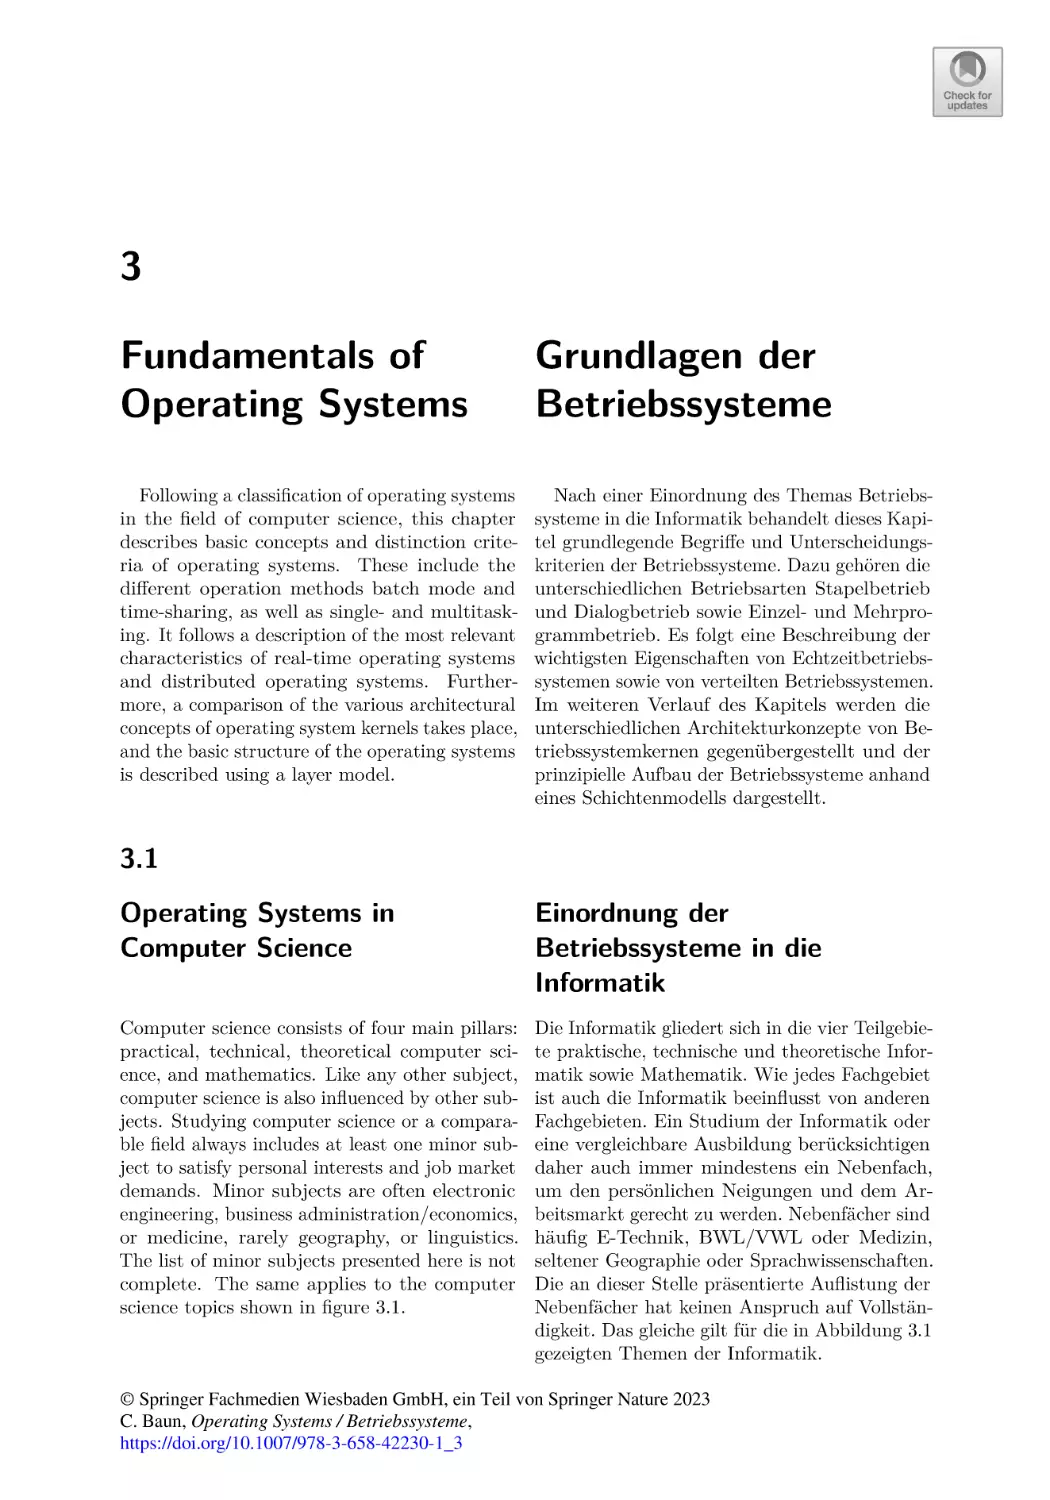 3 Fundamentals of Operating Systems
3.1
Operating Systems in Computer Science